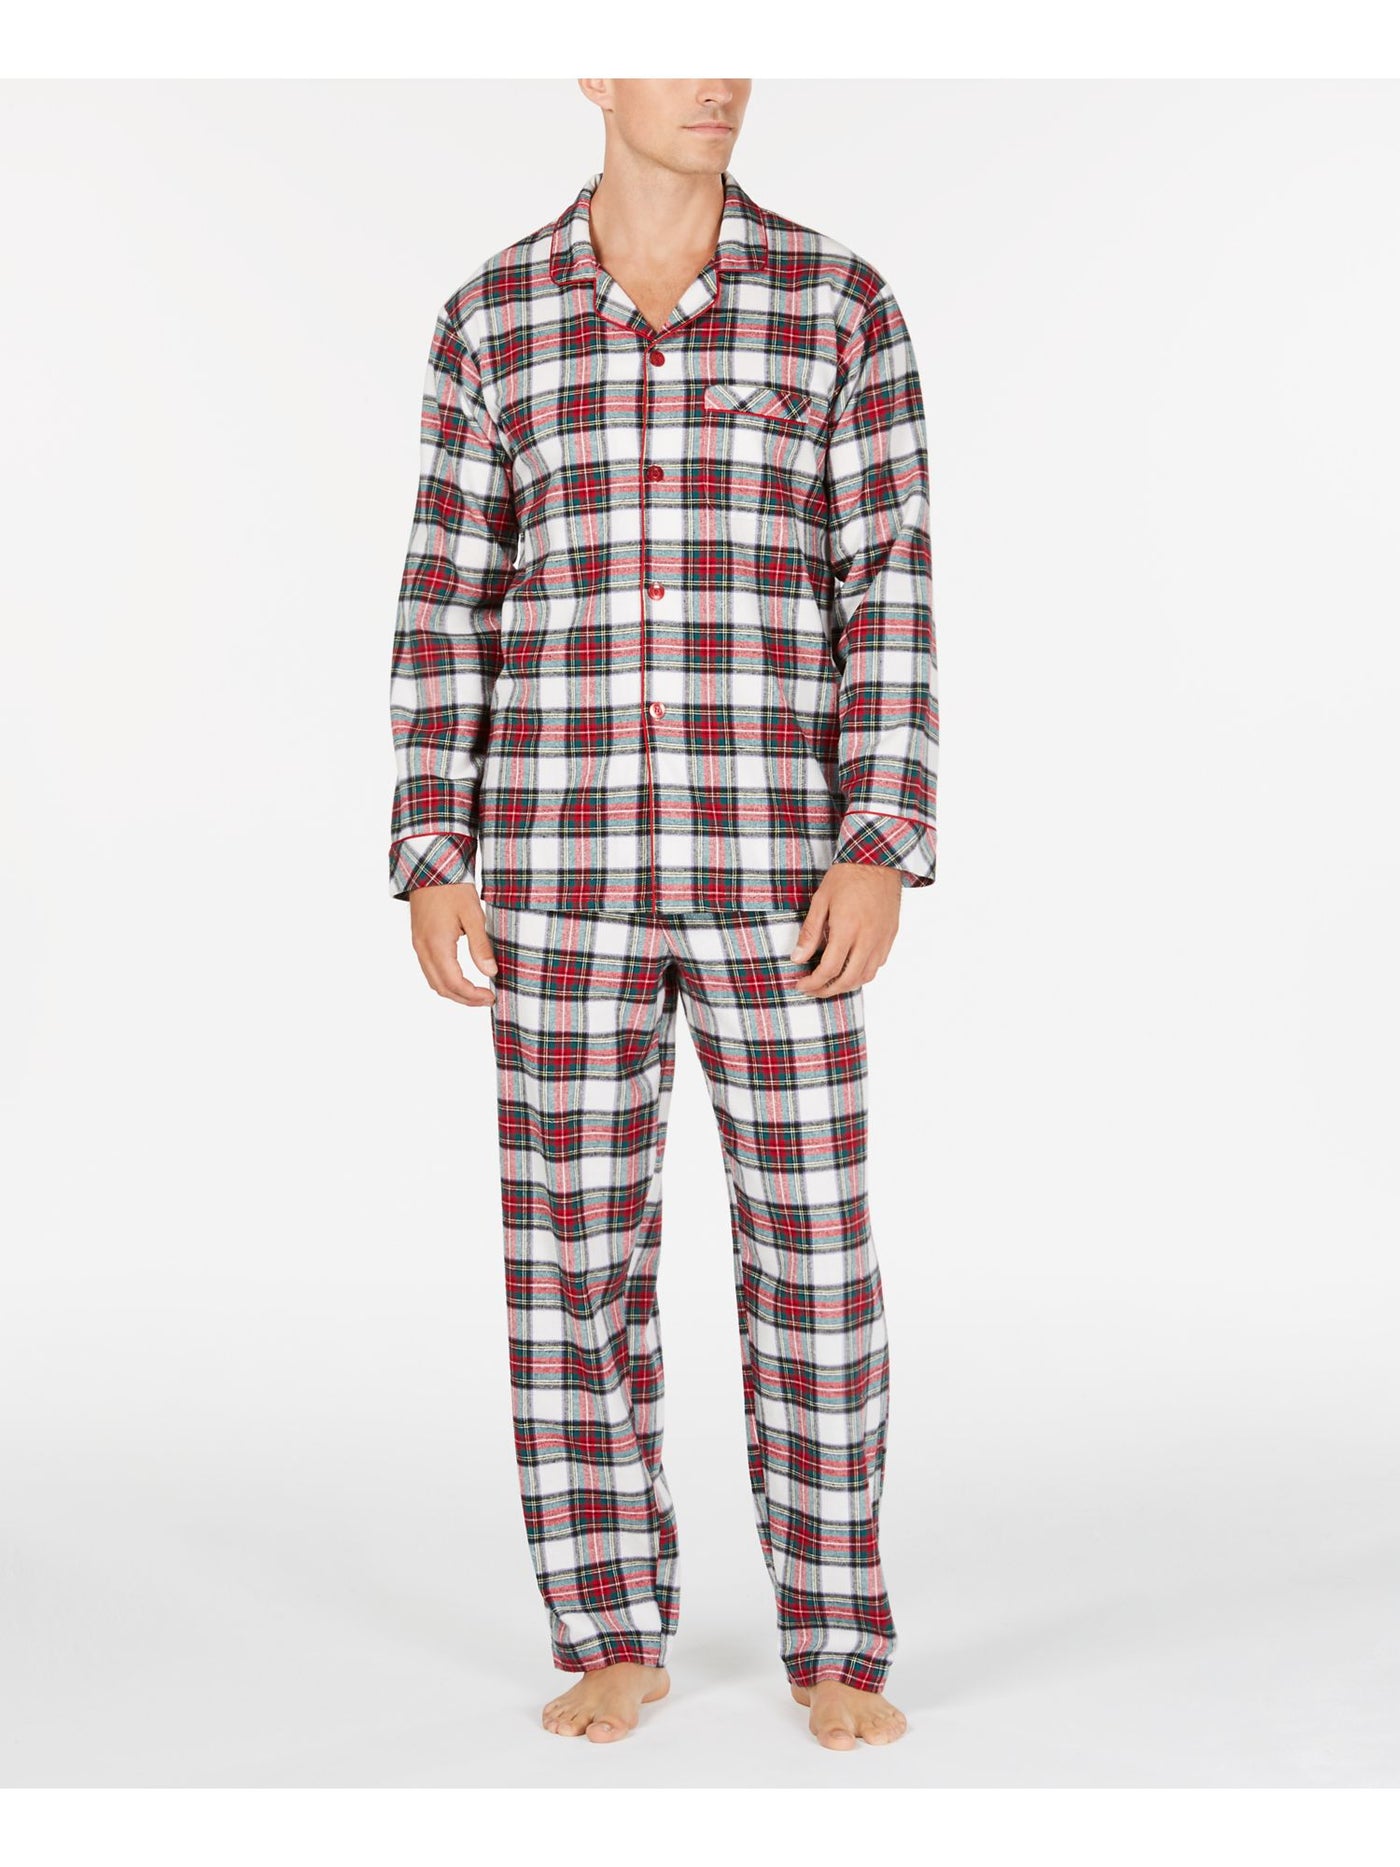 FAMILY PJs Mens White Plaid Pocketed Long Sleeve Button Up Top Straight leg Pants Pajamas M